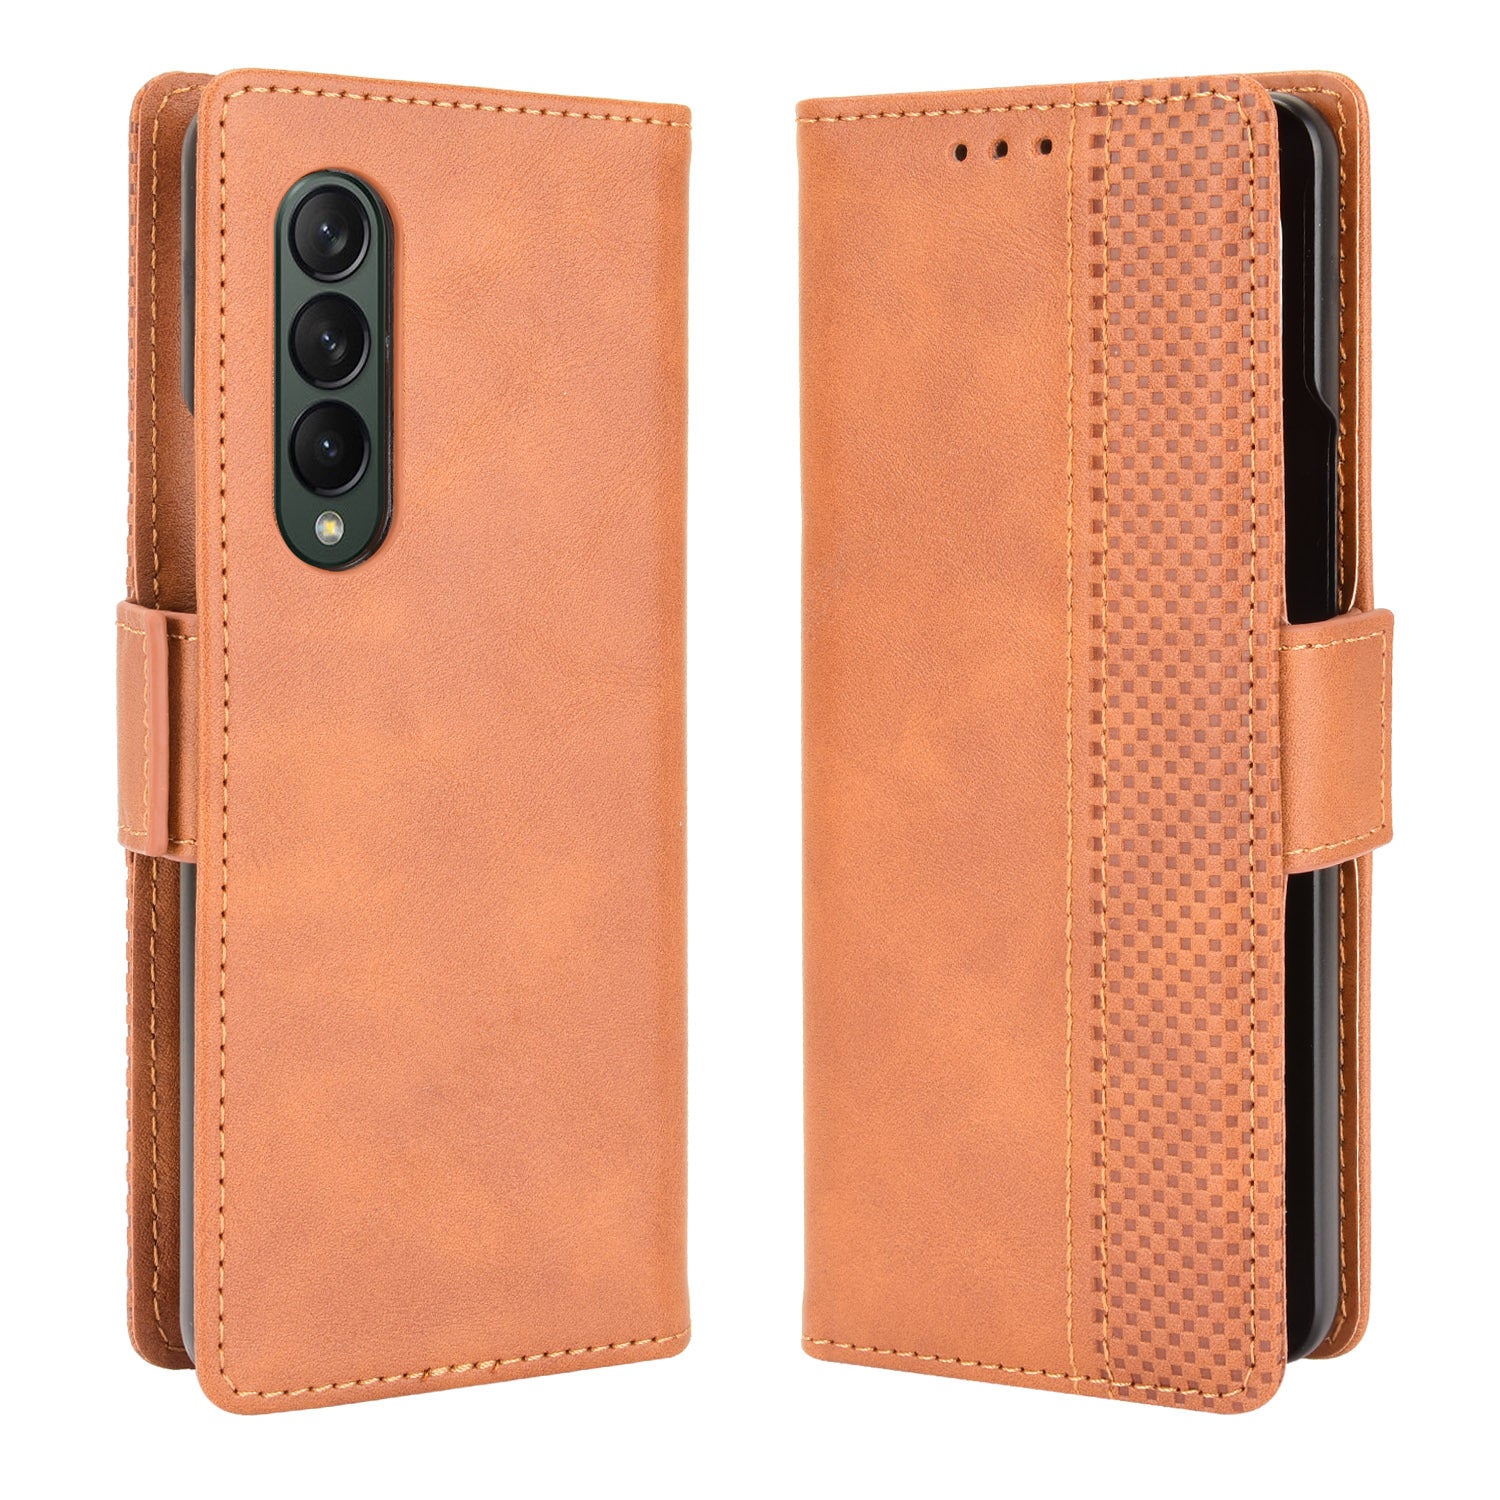 Samsung Galaxy Z Fold 3 Phone Wallet Case with Card Holder